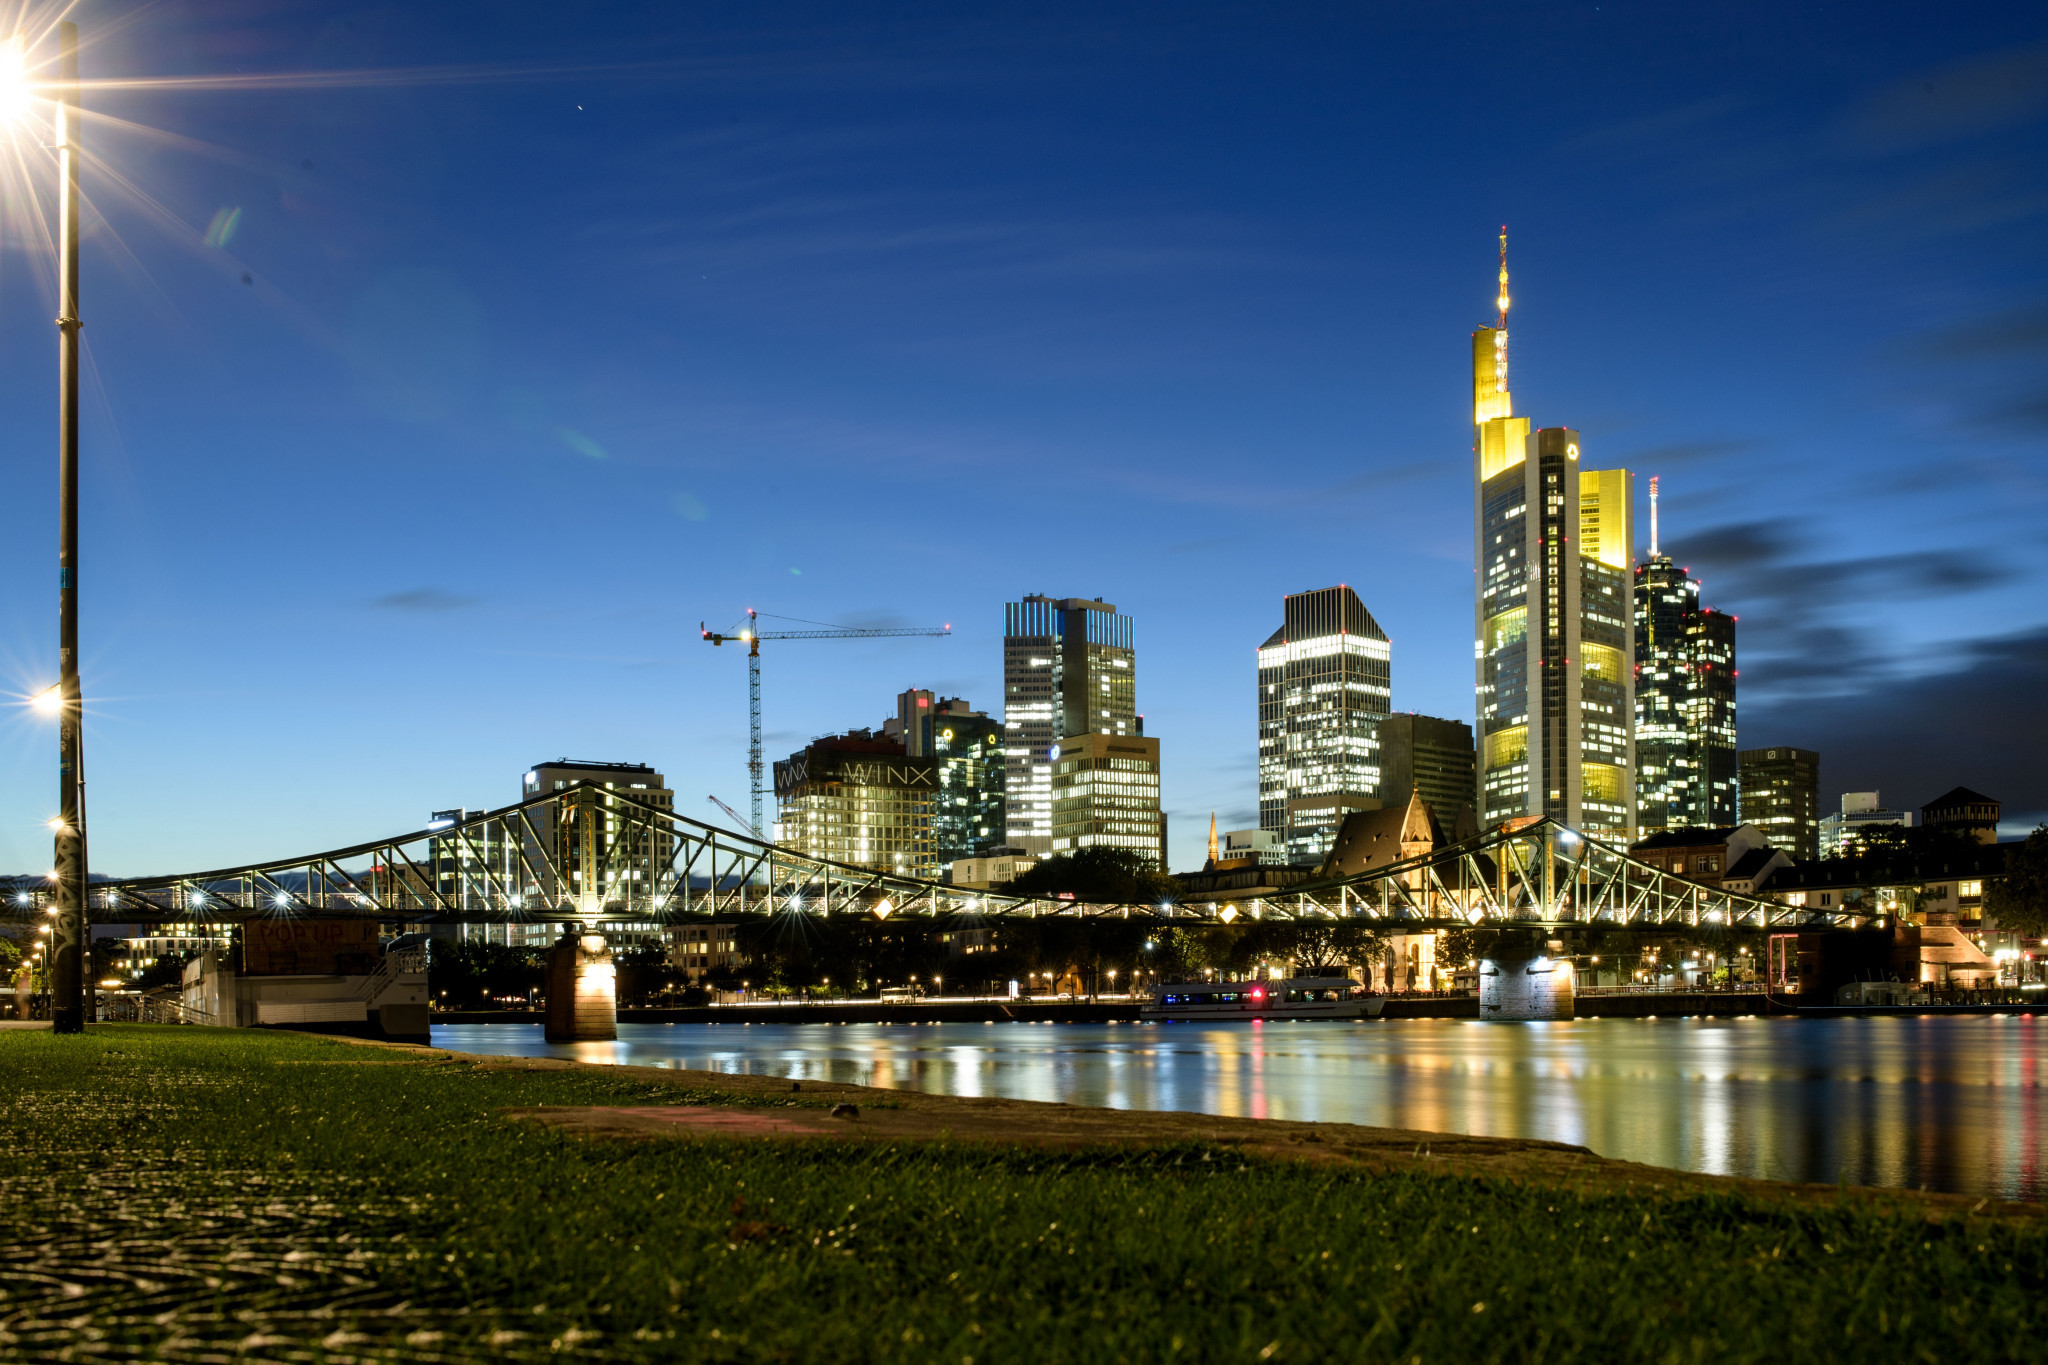 Frankfurt has been chosen for the Congress due to its links to democracy ©Getty Images